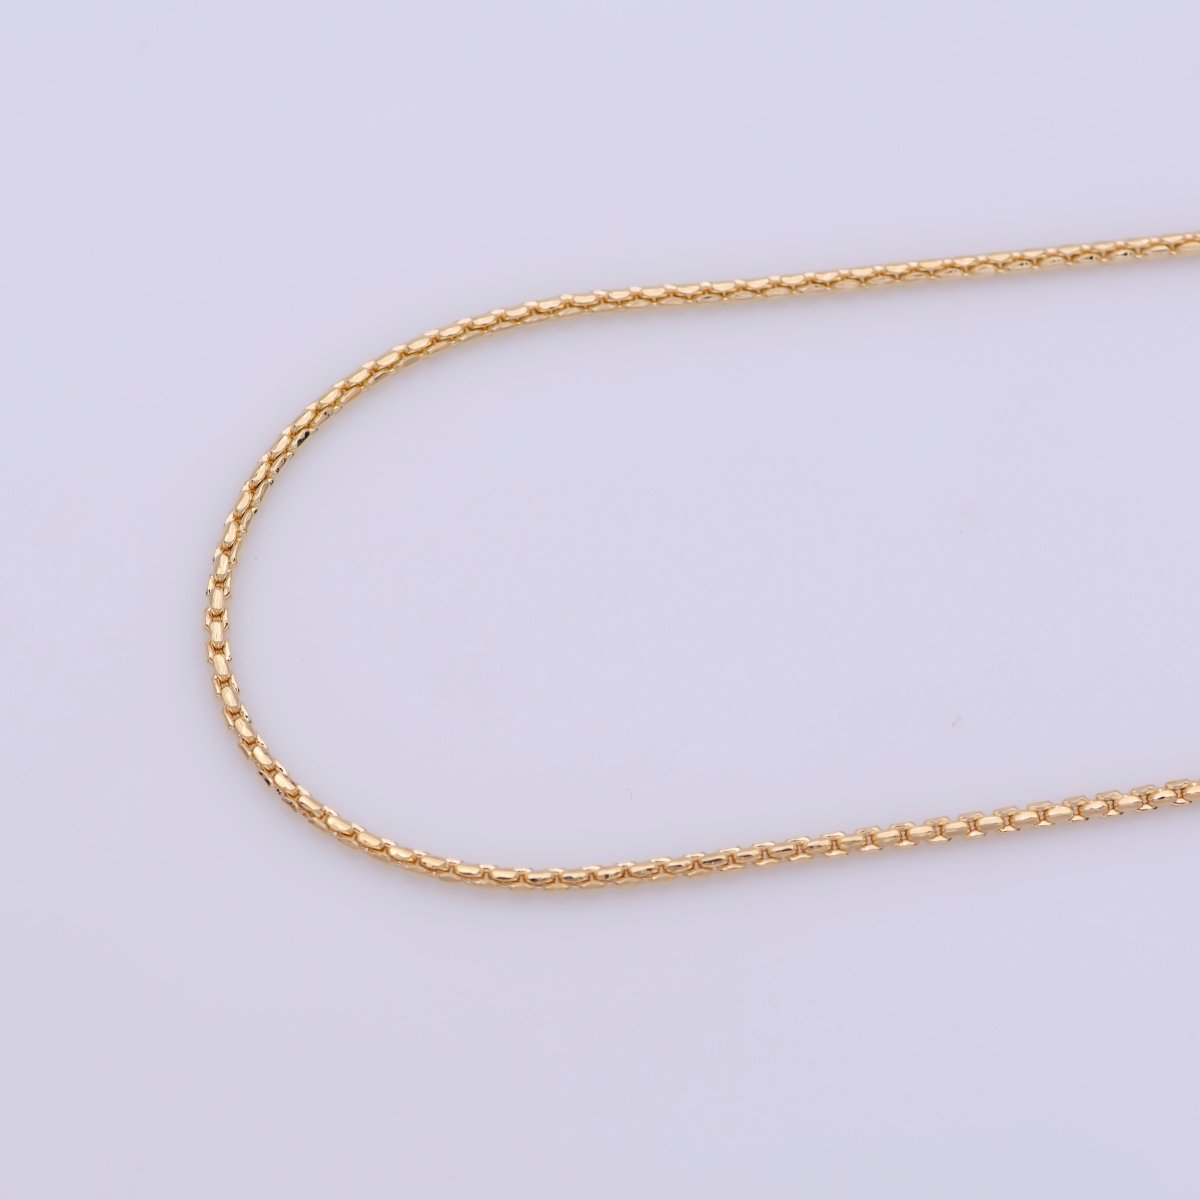 18 inches Cable Chain Necklace, 18K Gold Plated Finished Chain For Jewelry Making, Dainty 1.4mm Cable Necklace w/ Lobster Clasps | CN-375 Clearance Pricing - DLUXCA